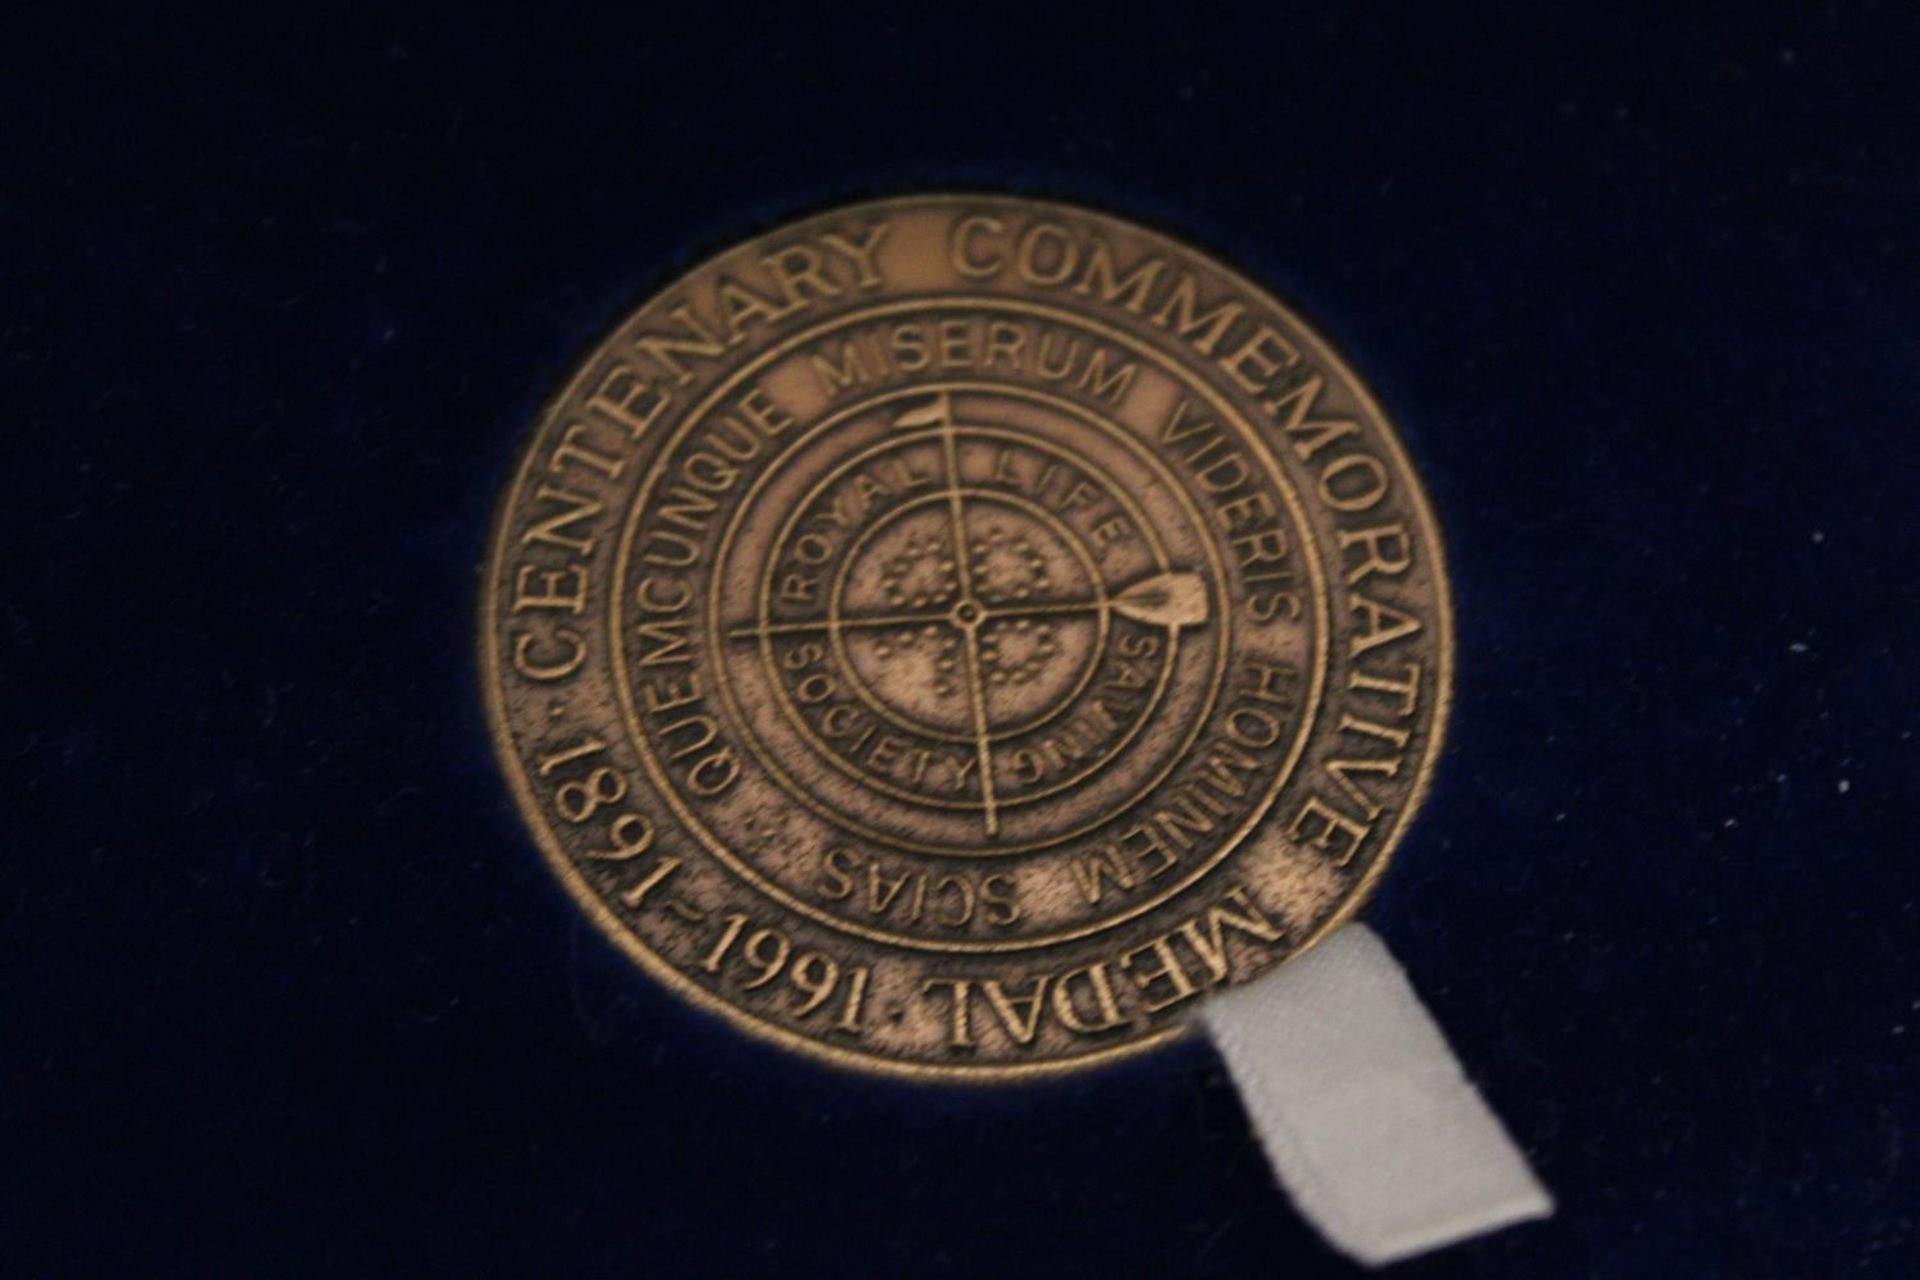 A BOXED BRONZE MEDAL AND ACCOMPANYING PATCH - Image 3 of 4